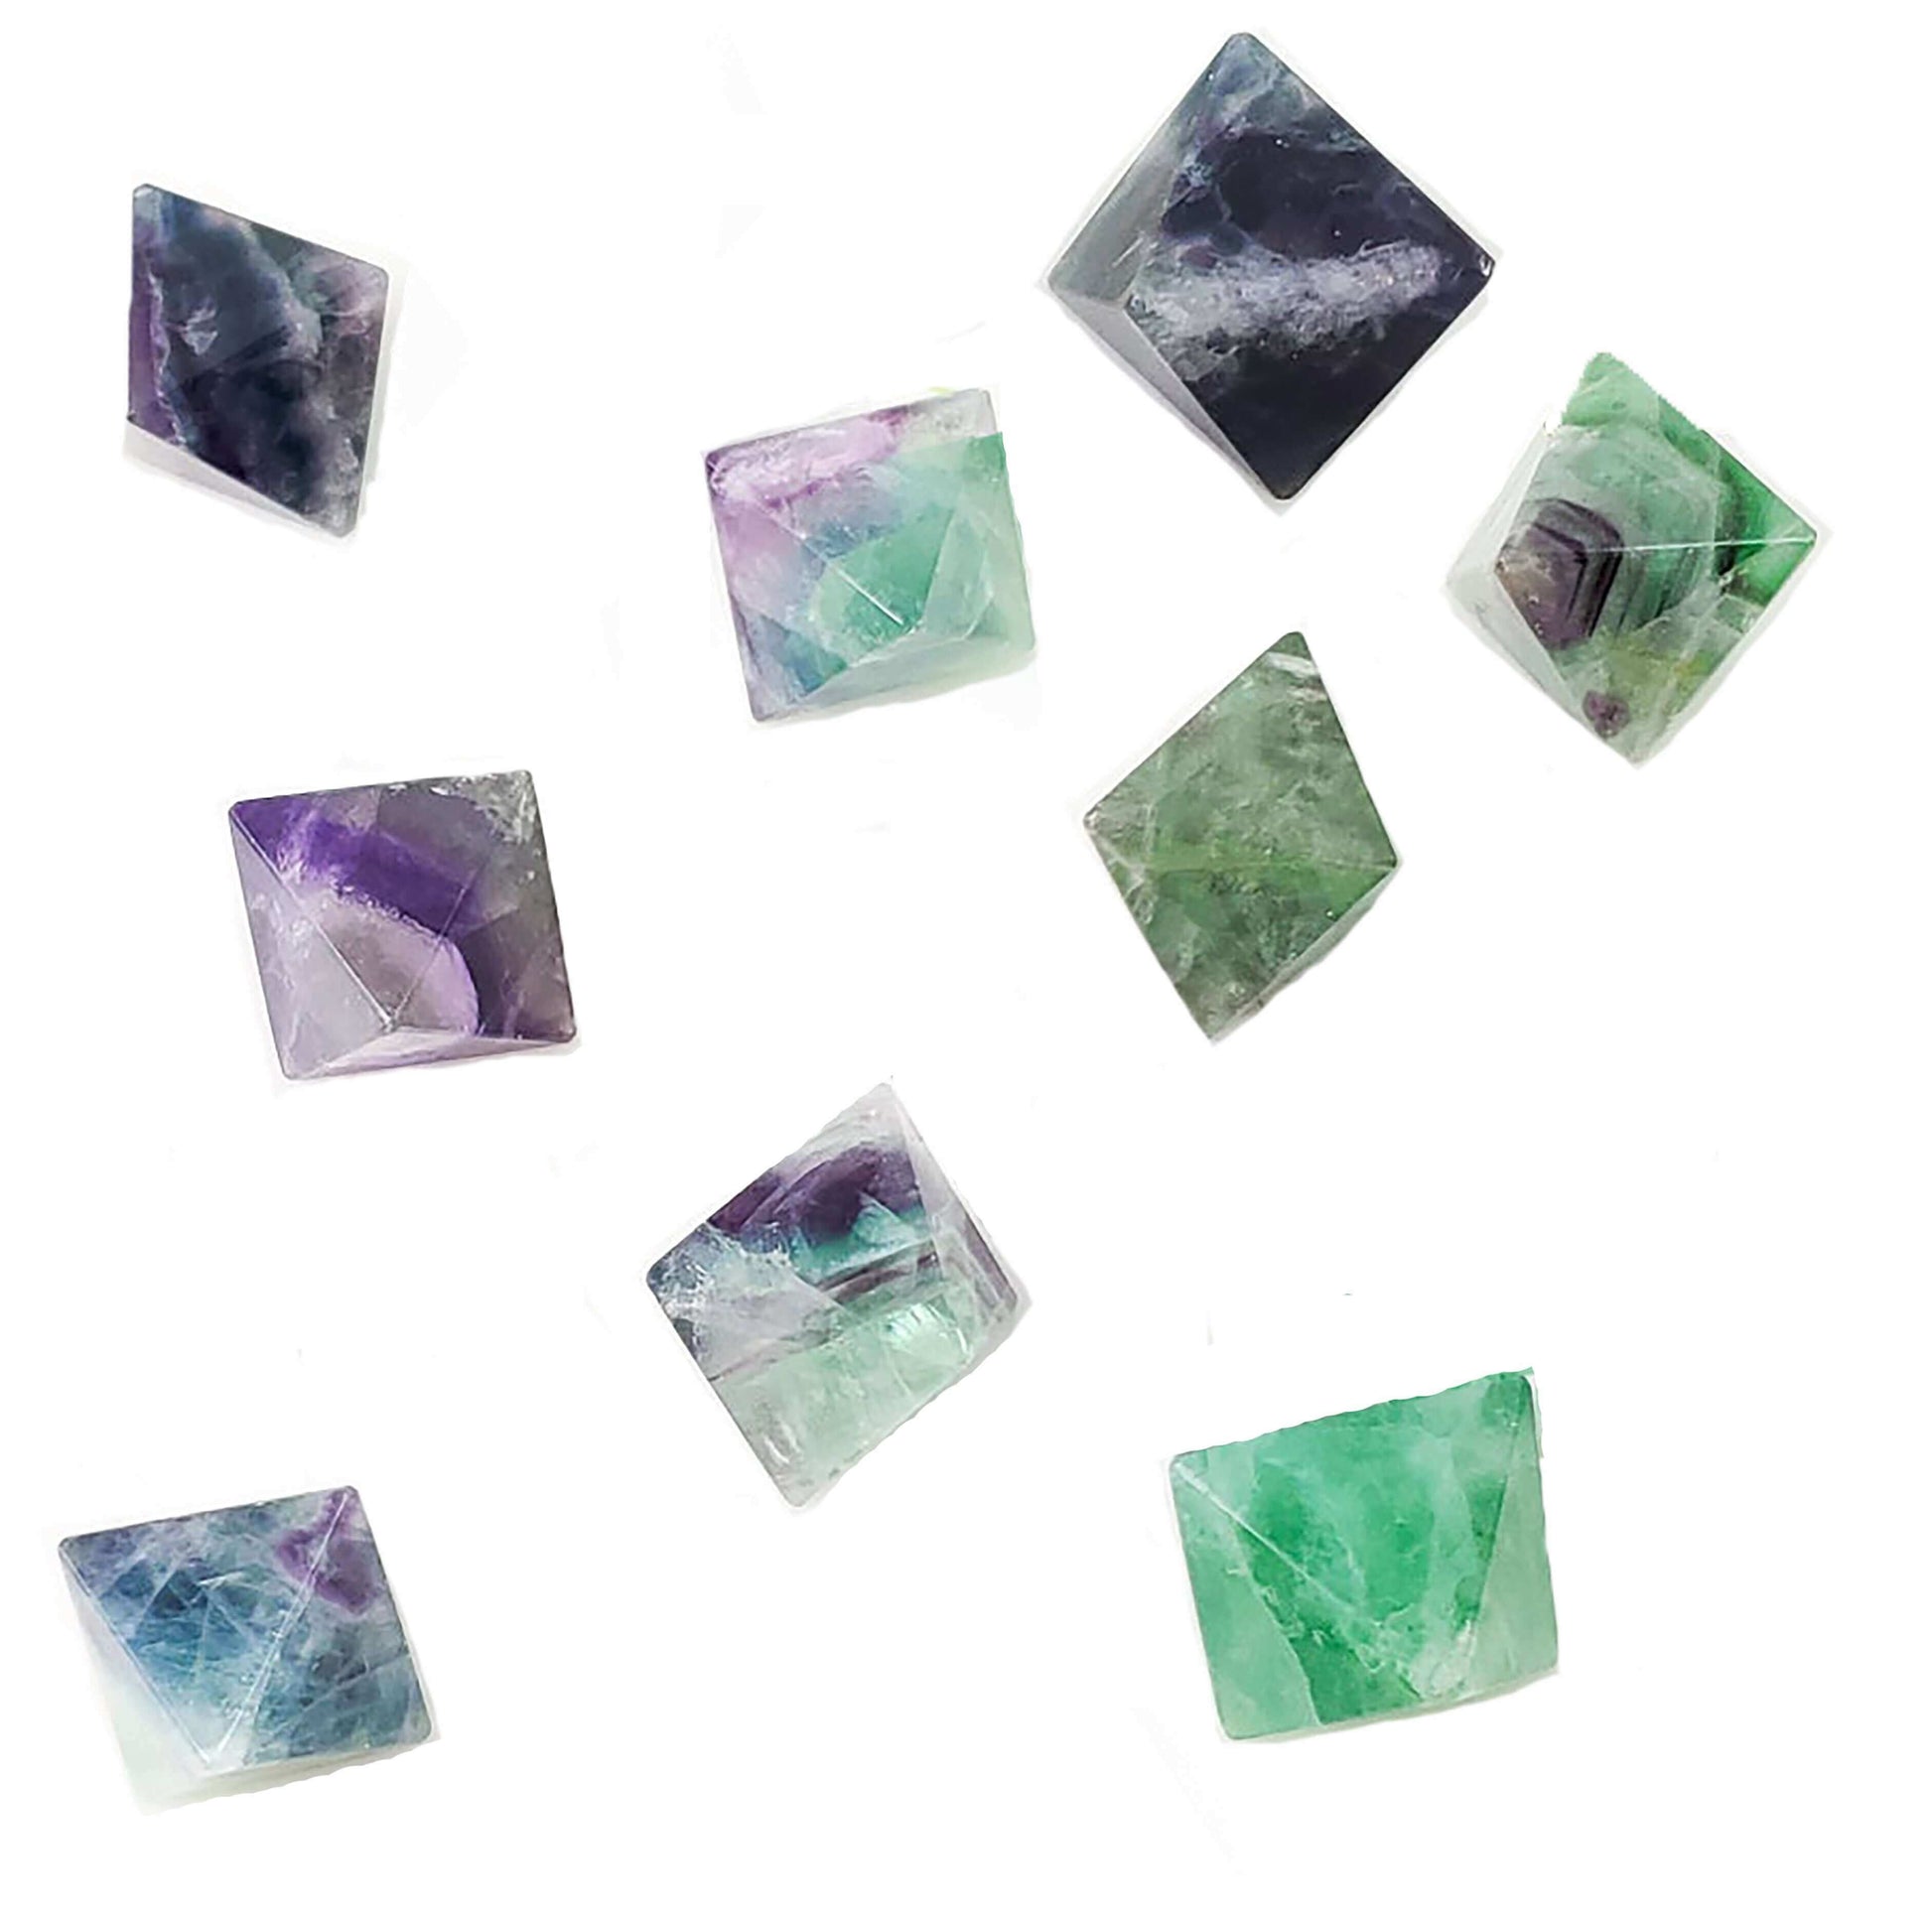 Fluorite octahedron 2 - 2.5 cm at $18 only from Spiral Rain